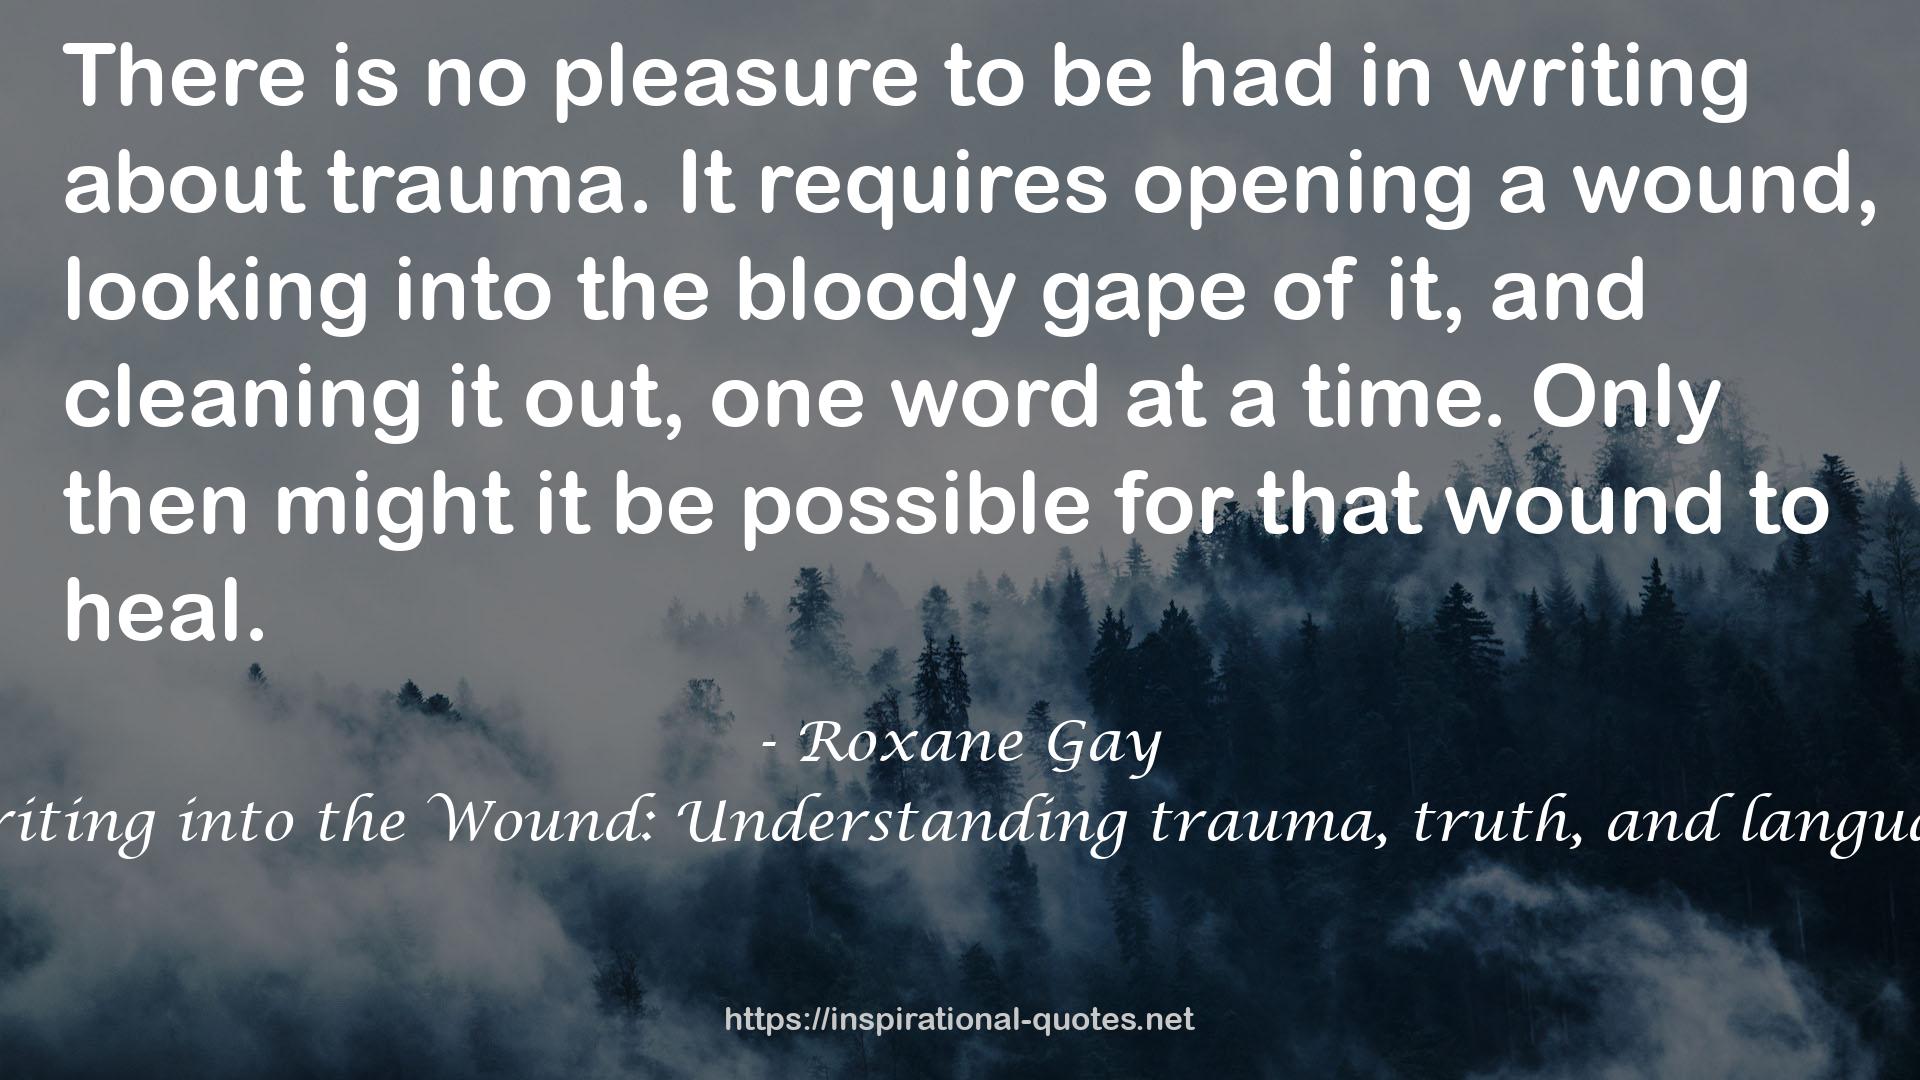 Writing into the Wound: Understanding trauma, truth, and language QUOTES